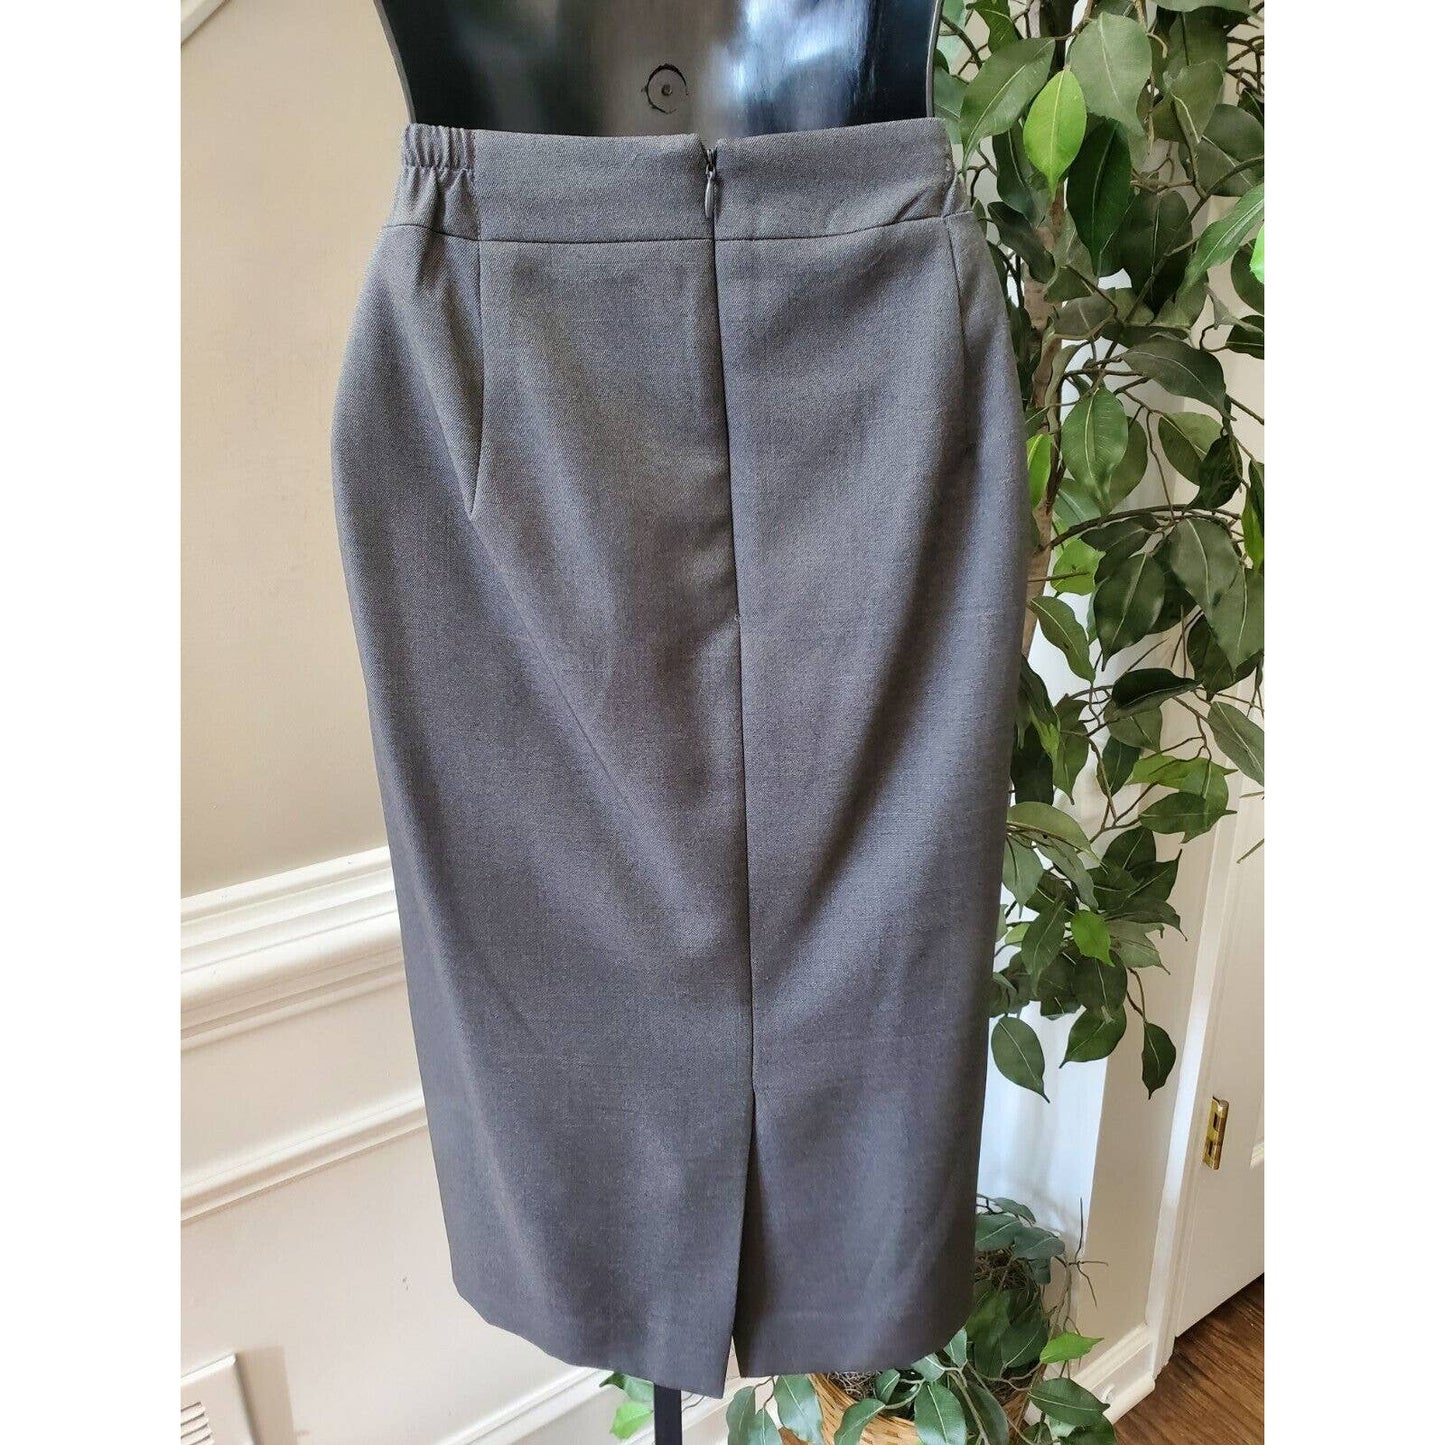 Emily Women's Gray Polyester Single Breasted Blazer & Skirt 2 Pc's Suit Size 14W